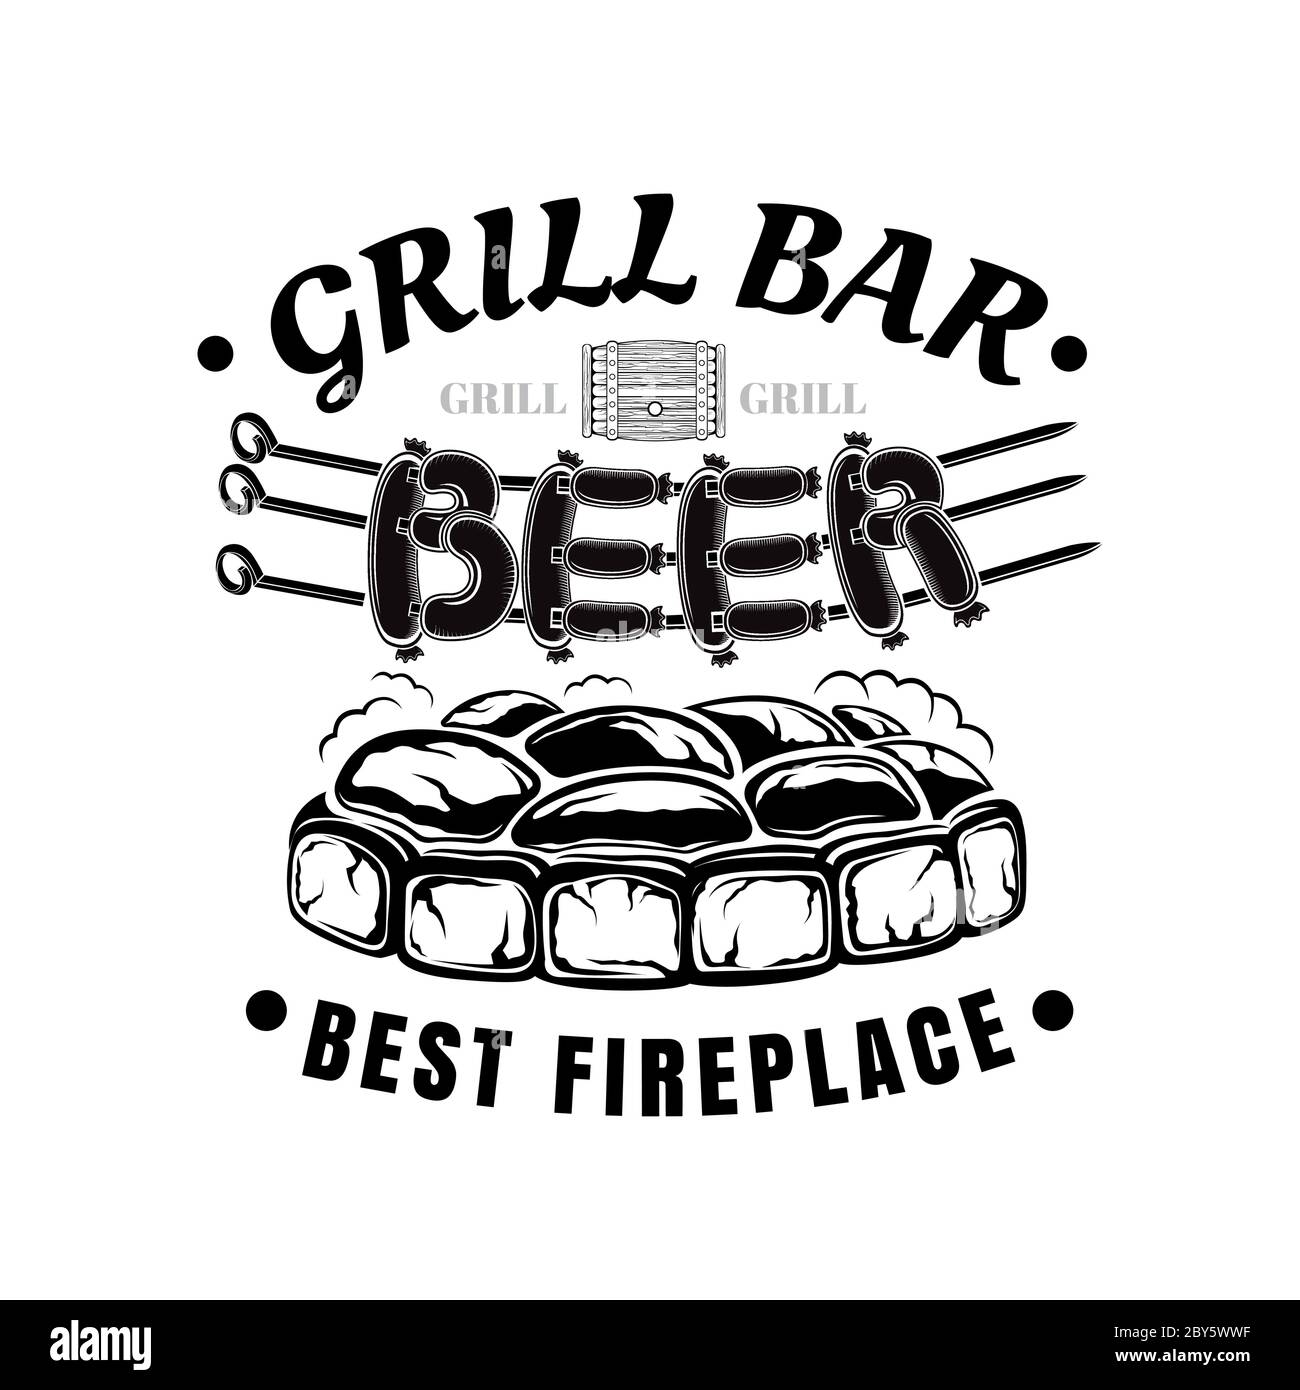 Label for grill bar, BBQ or public house. Word beer from sausages strung on spit grilled on charcoal Stock Vector